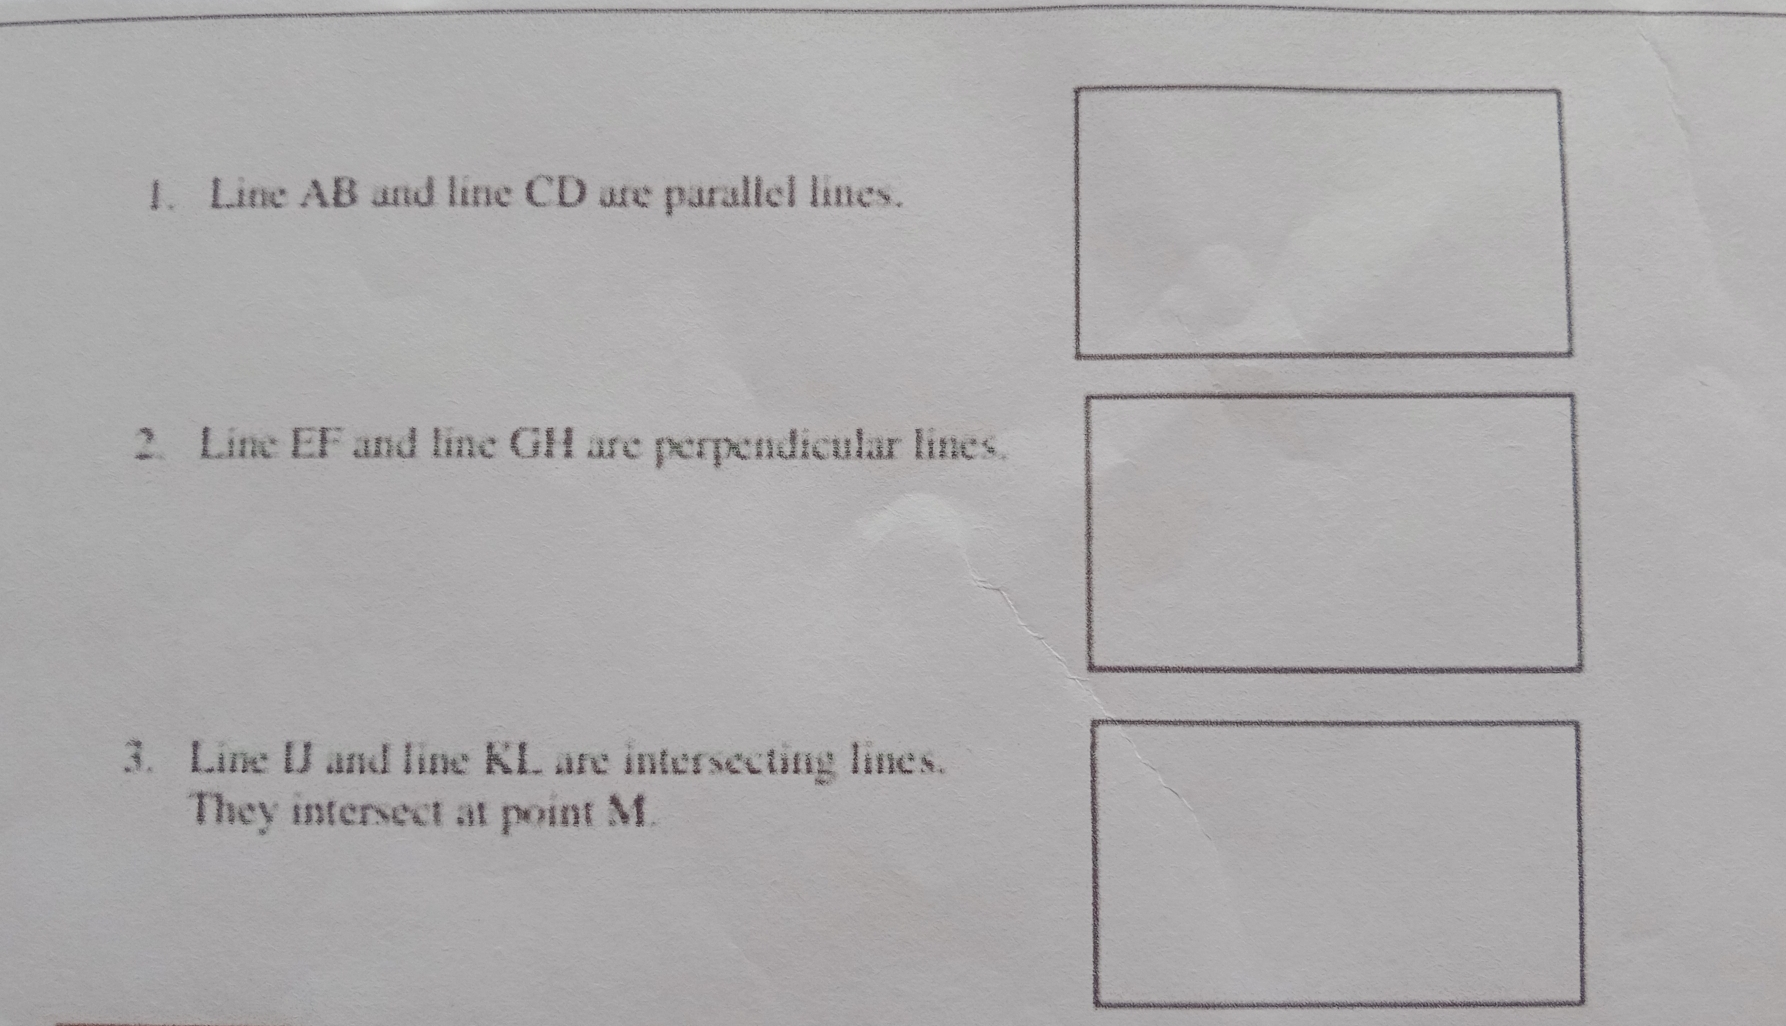 1. Line AB and line CD are parallel lines. 2 Line EF and line GH are perpendicular lines 3. Line U and line KL are intersecting lines. They intersect at point M.